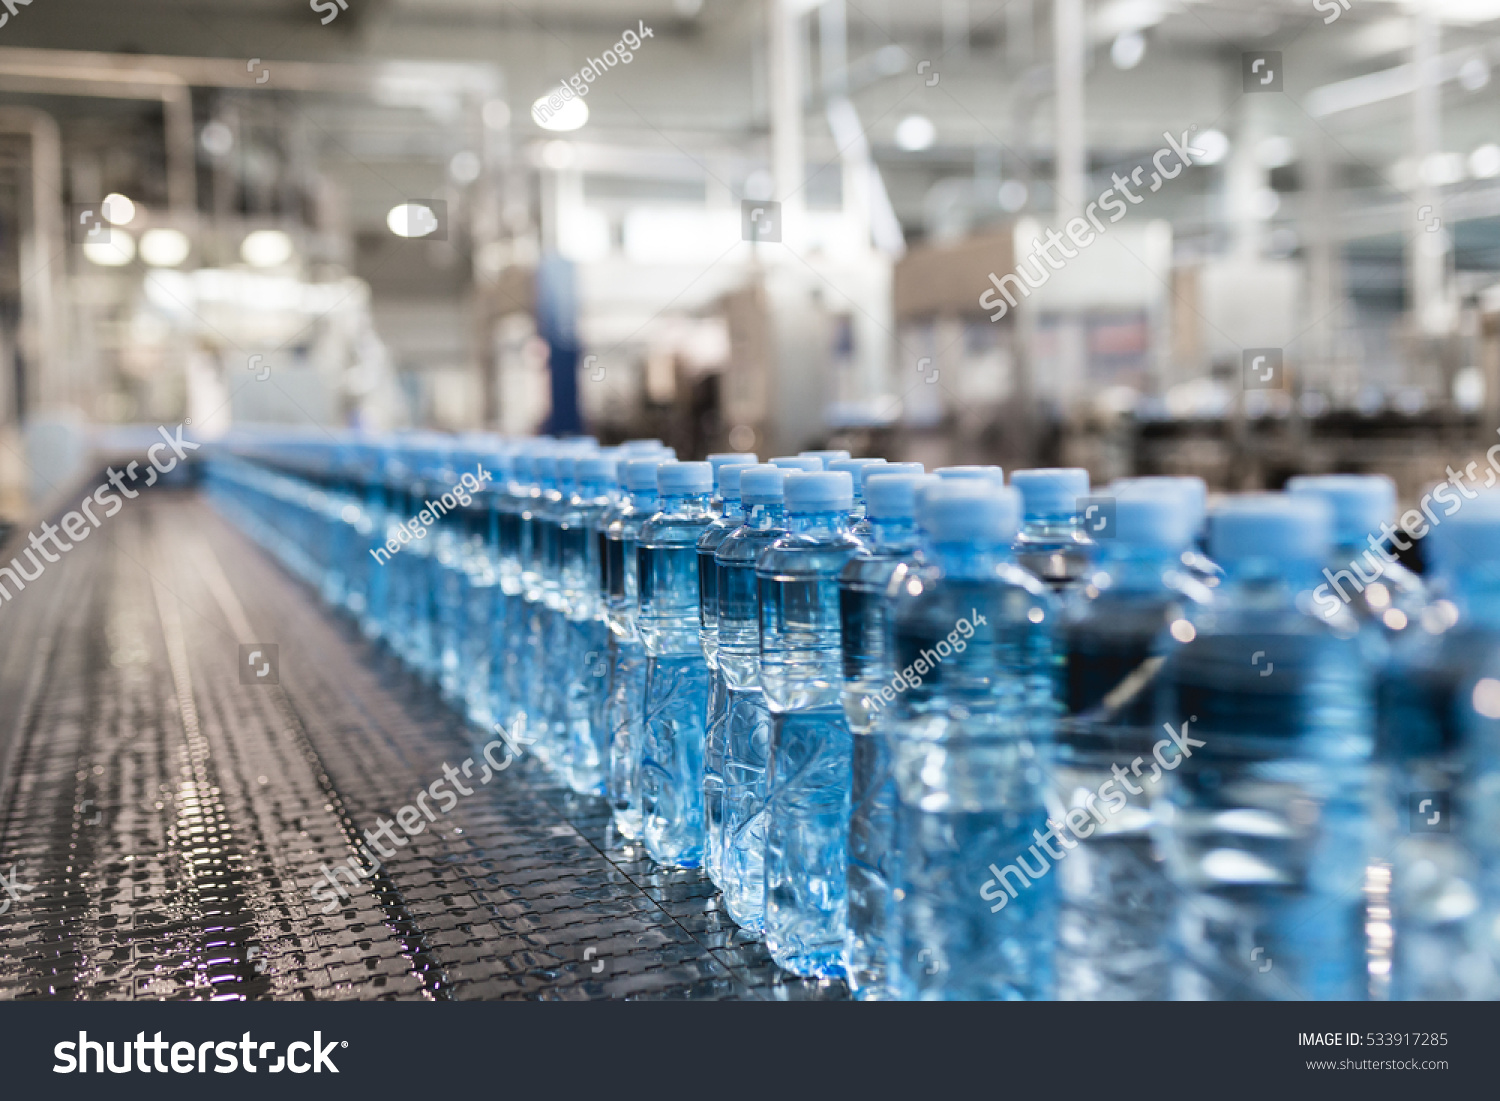 Water factory - Water bottling line for processing and bottling pure spring water into green glass small bottles. Selective focus. #533917285